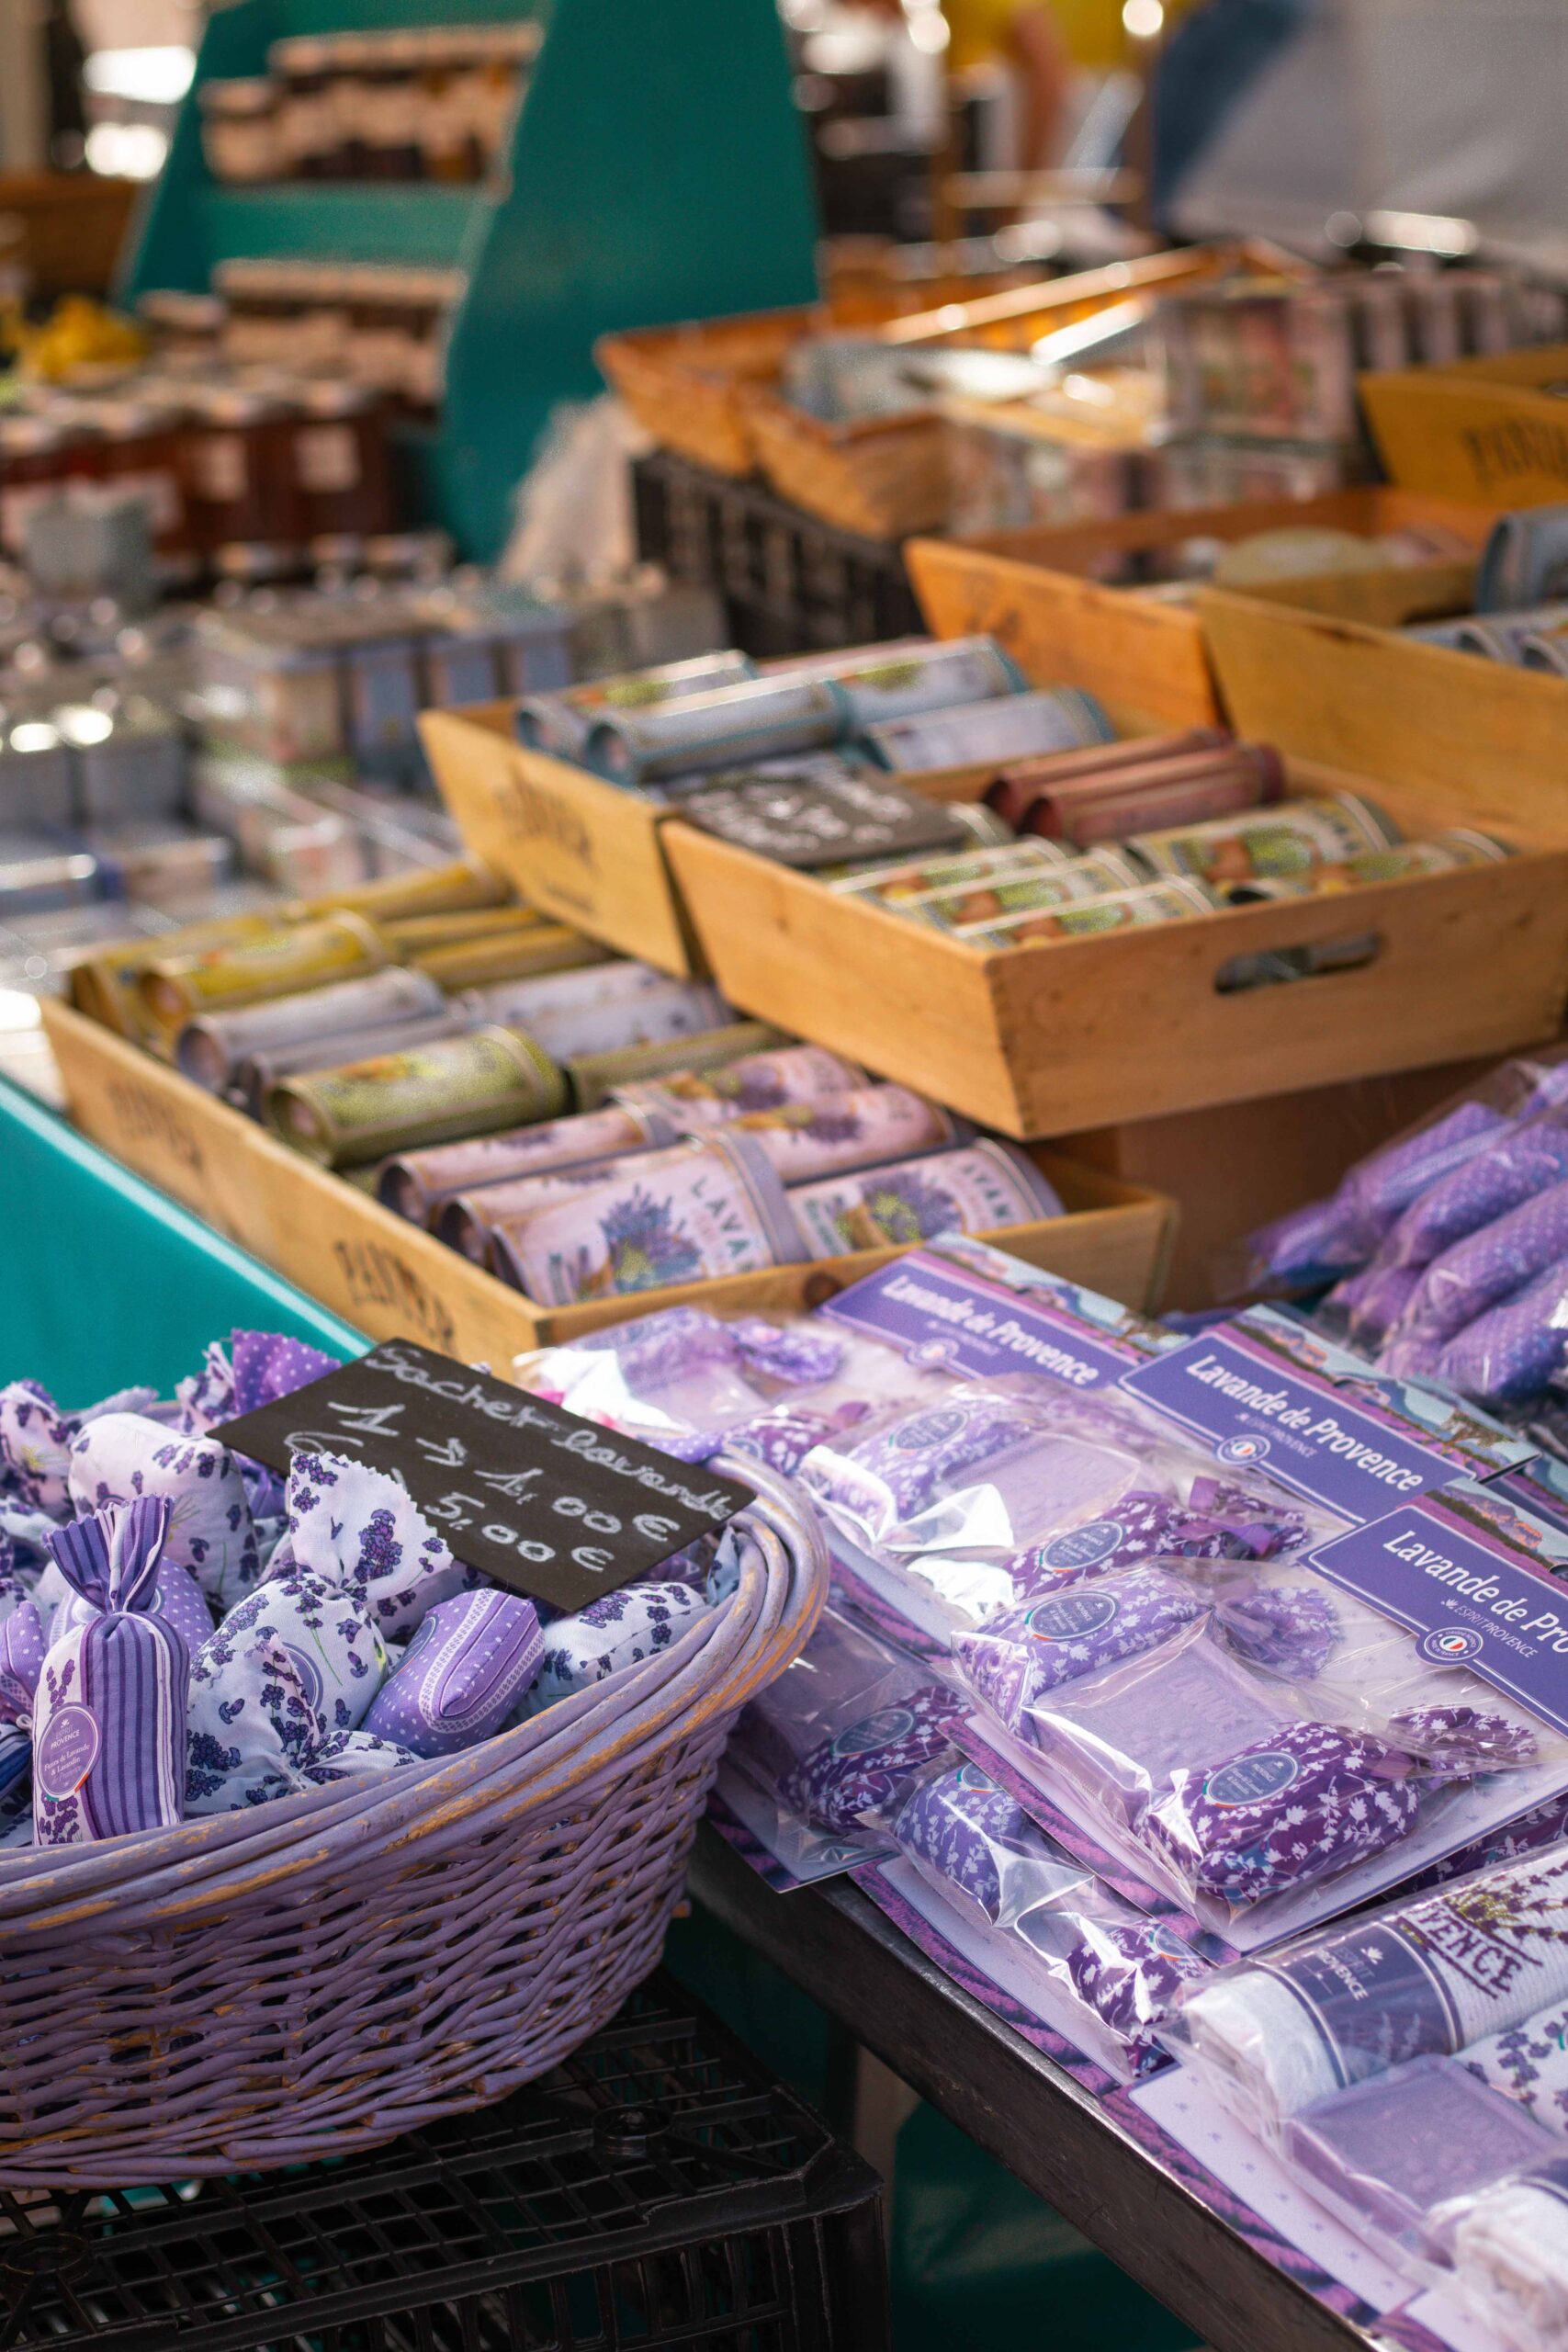 Details of a market stall selling lavender-related products at the Marché Aux Fleurs Cours Saleya in Nice, France